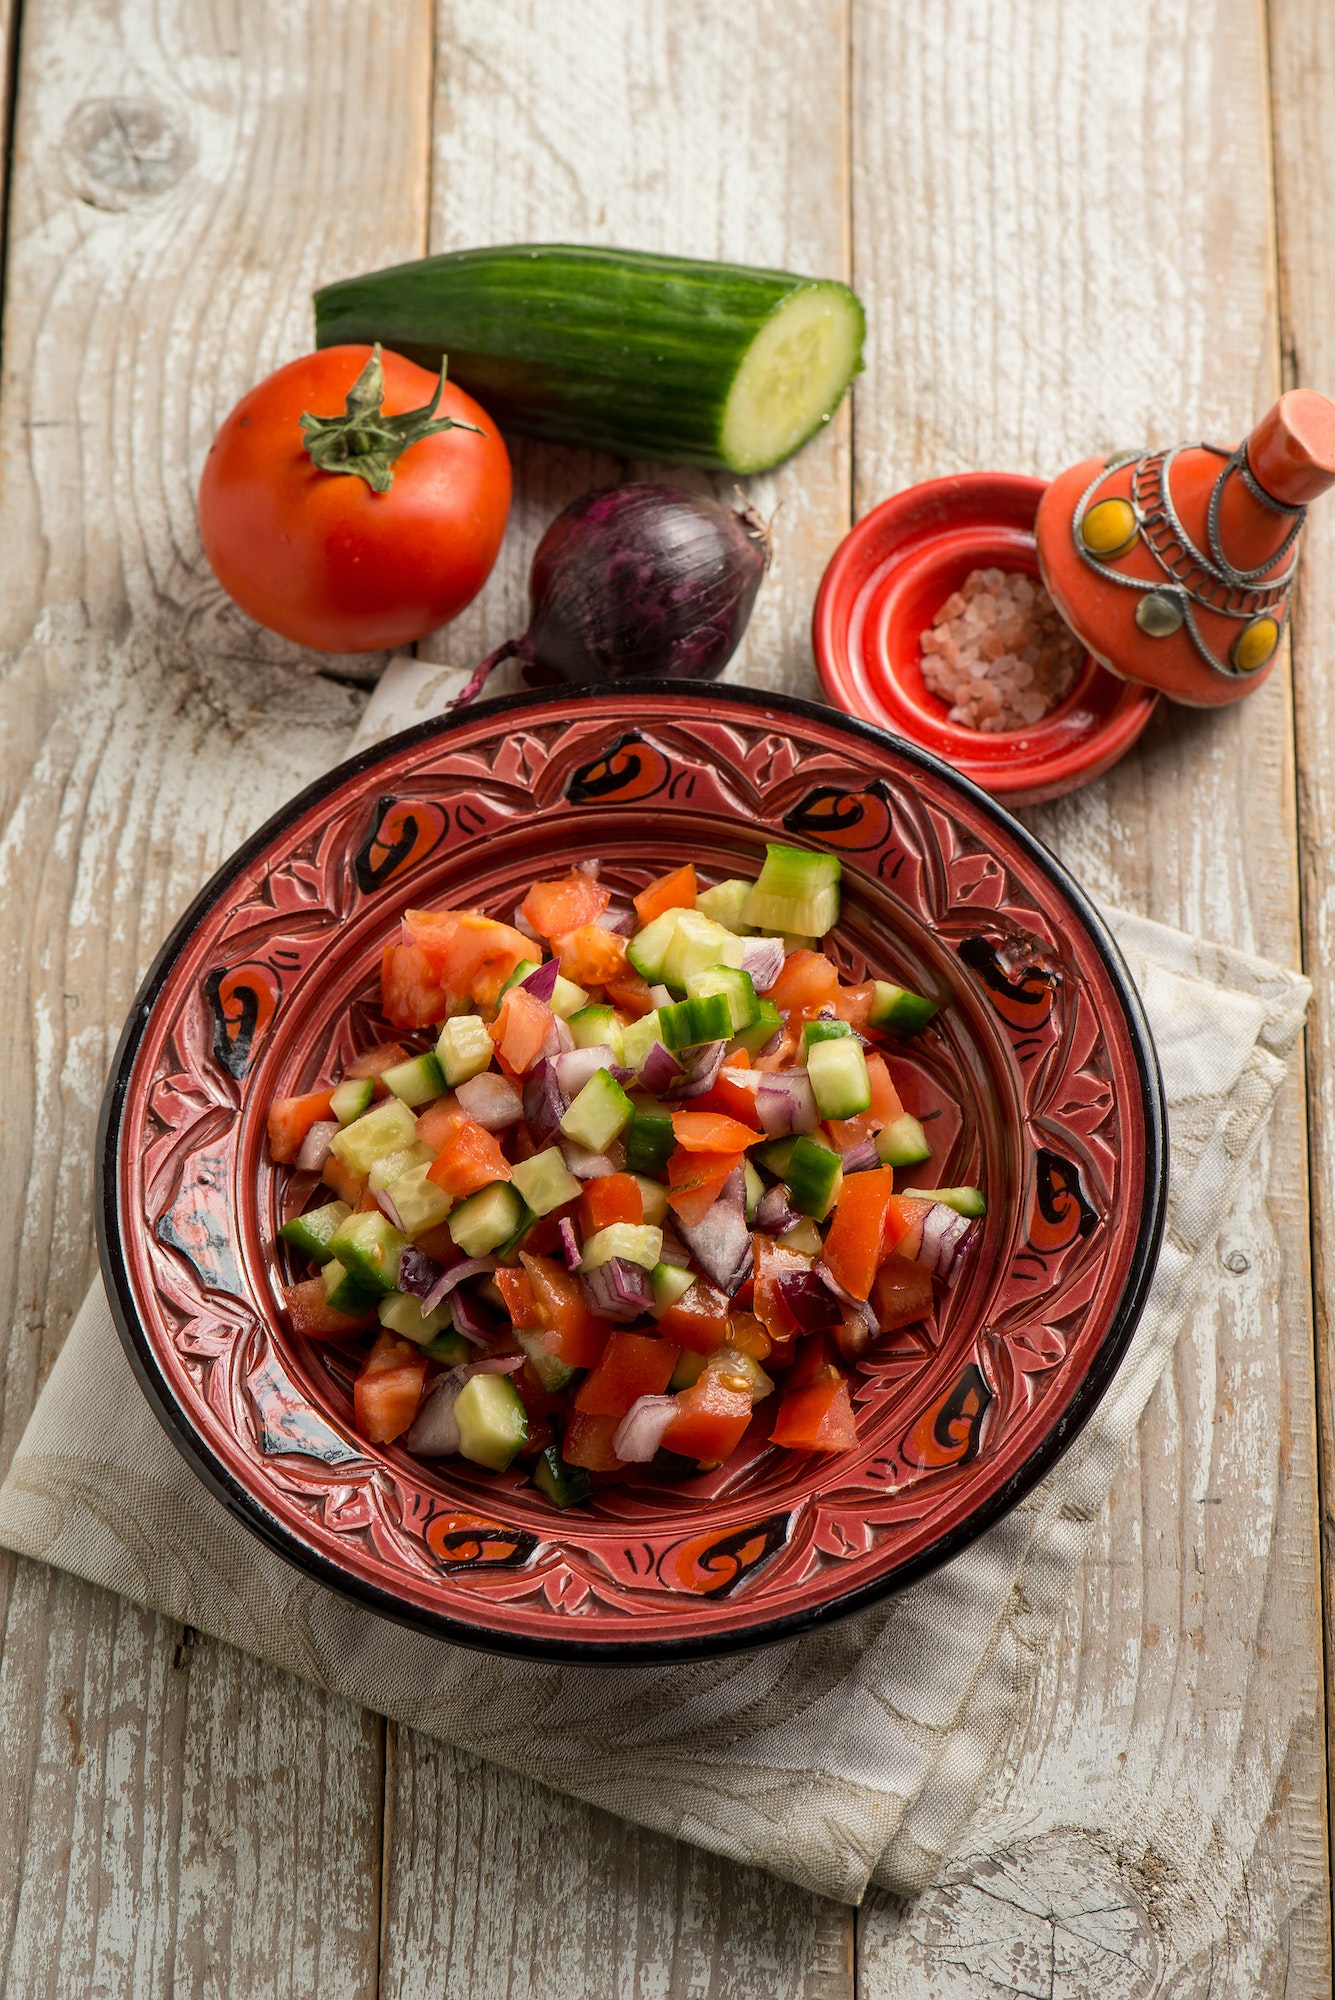 traditional moroccan salad with onions tomatoes and cucumber